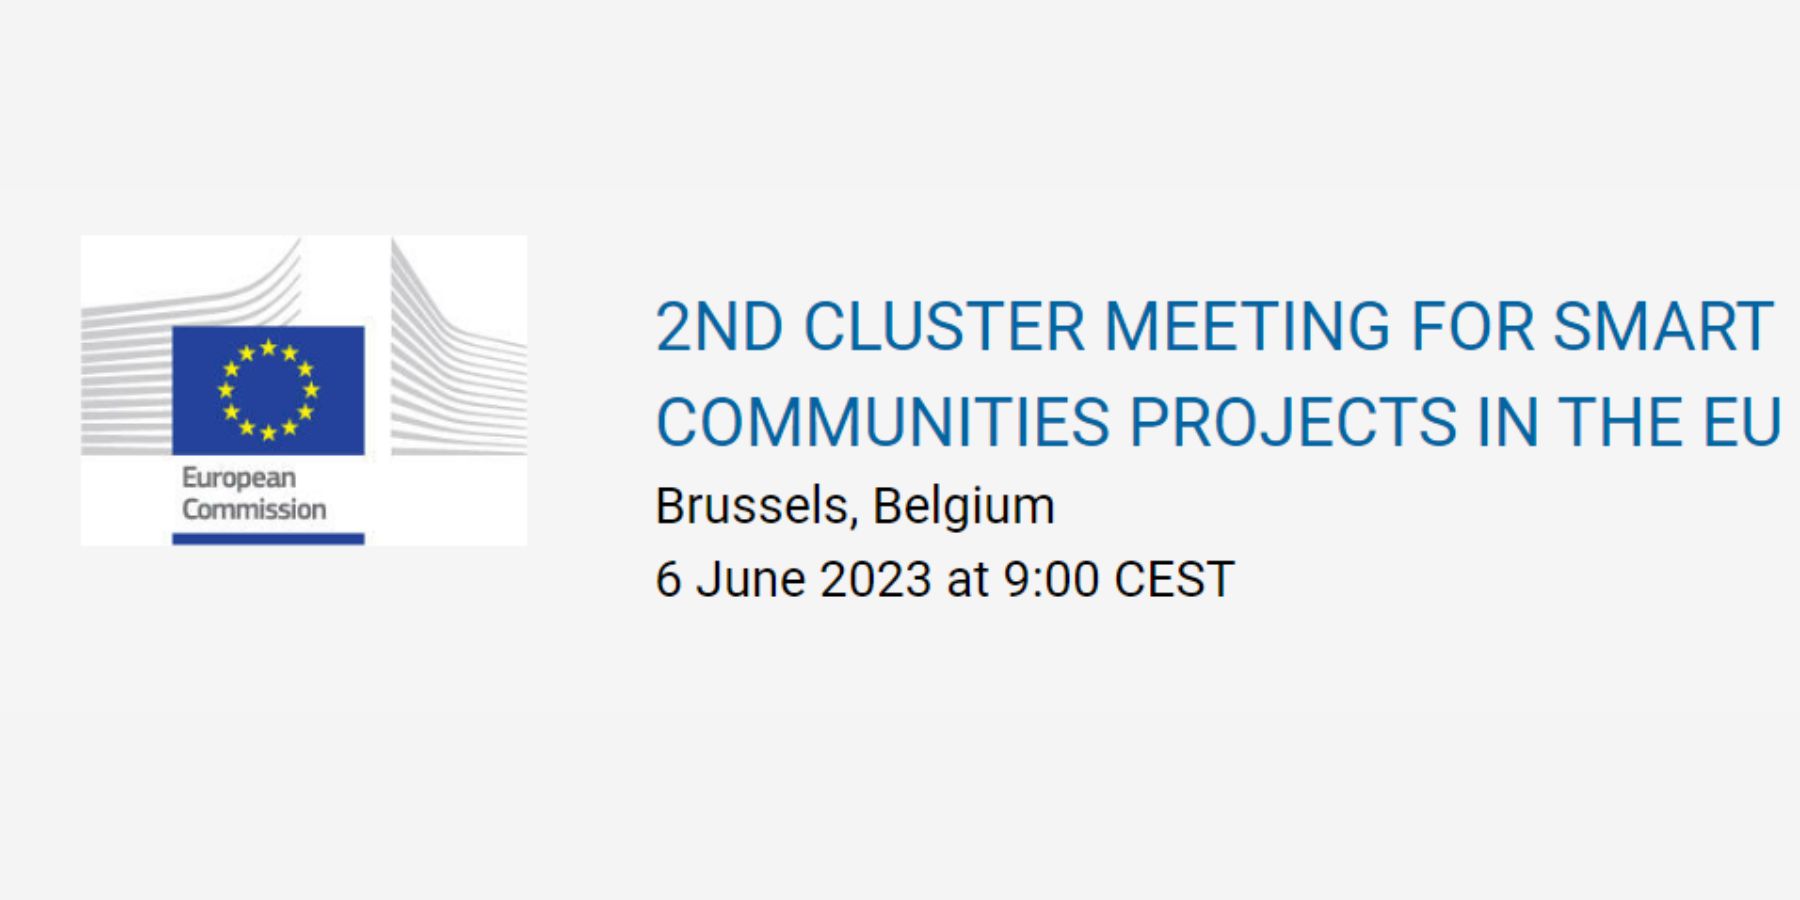 Second cluster meeting for smart communities projects in the EU